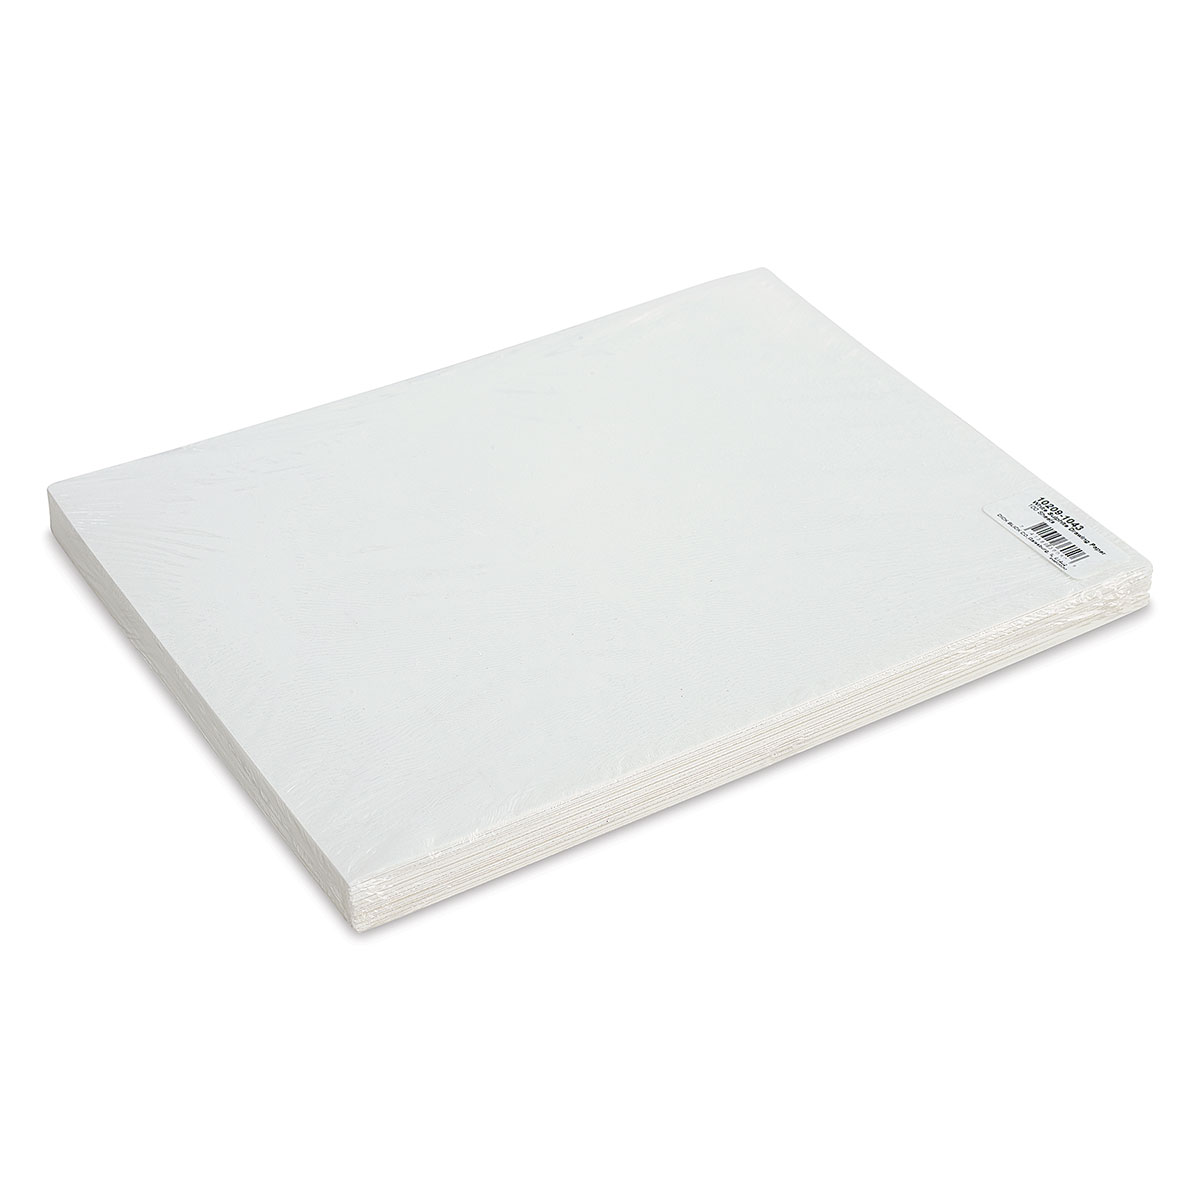 Blick Sulphite Drawing Papers 9" x 12", White, 100 Sheets, 80 lb